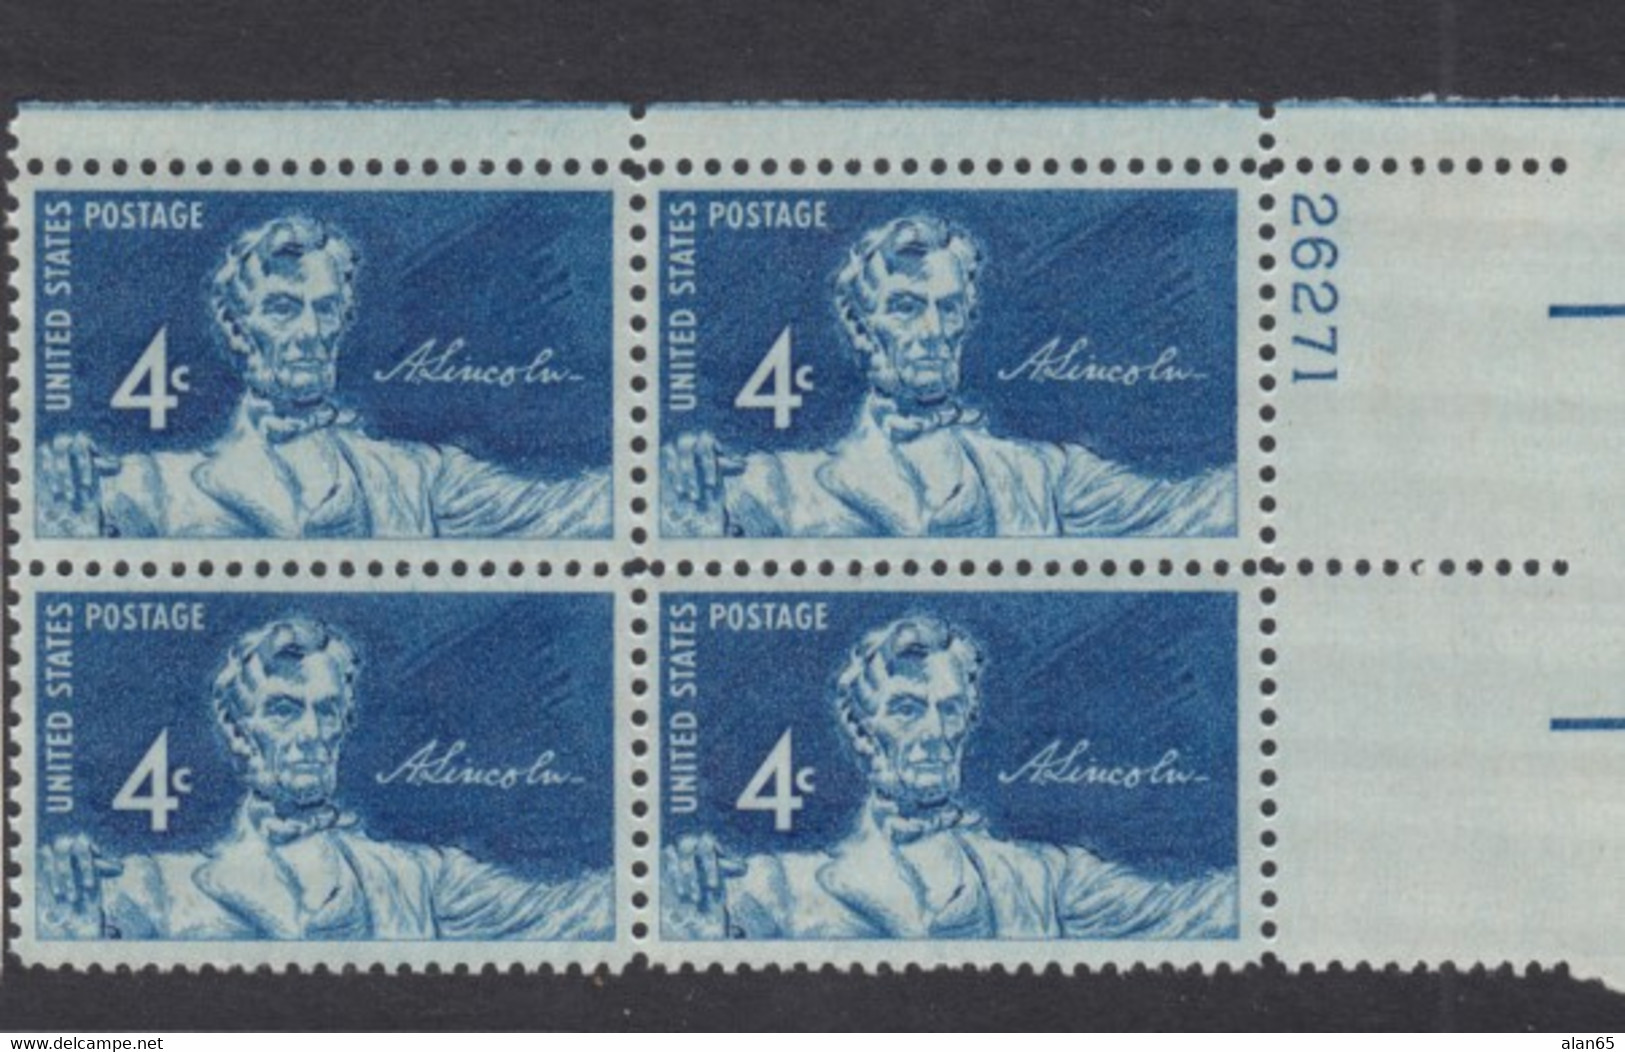 Sc#1116, Plate # Block Of 4 MNH, 4c Lincoln Sesquicentennial Issue, Daniel Chester French Statue US President Lincoln - Números De Placas